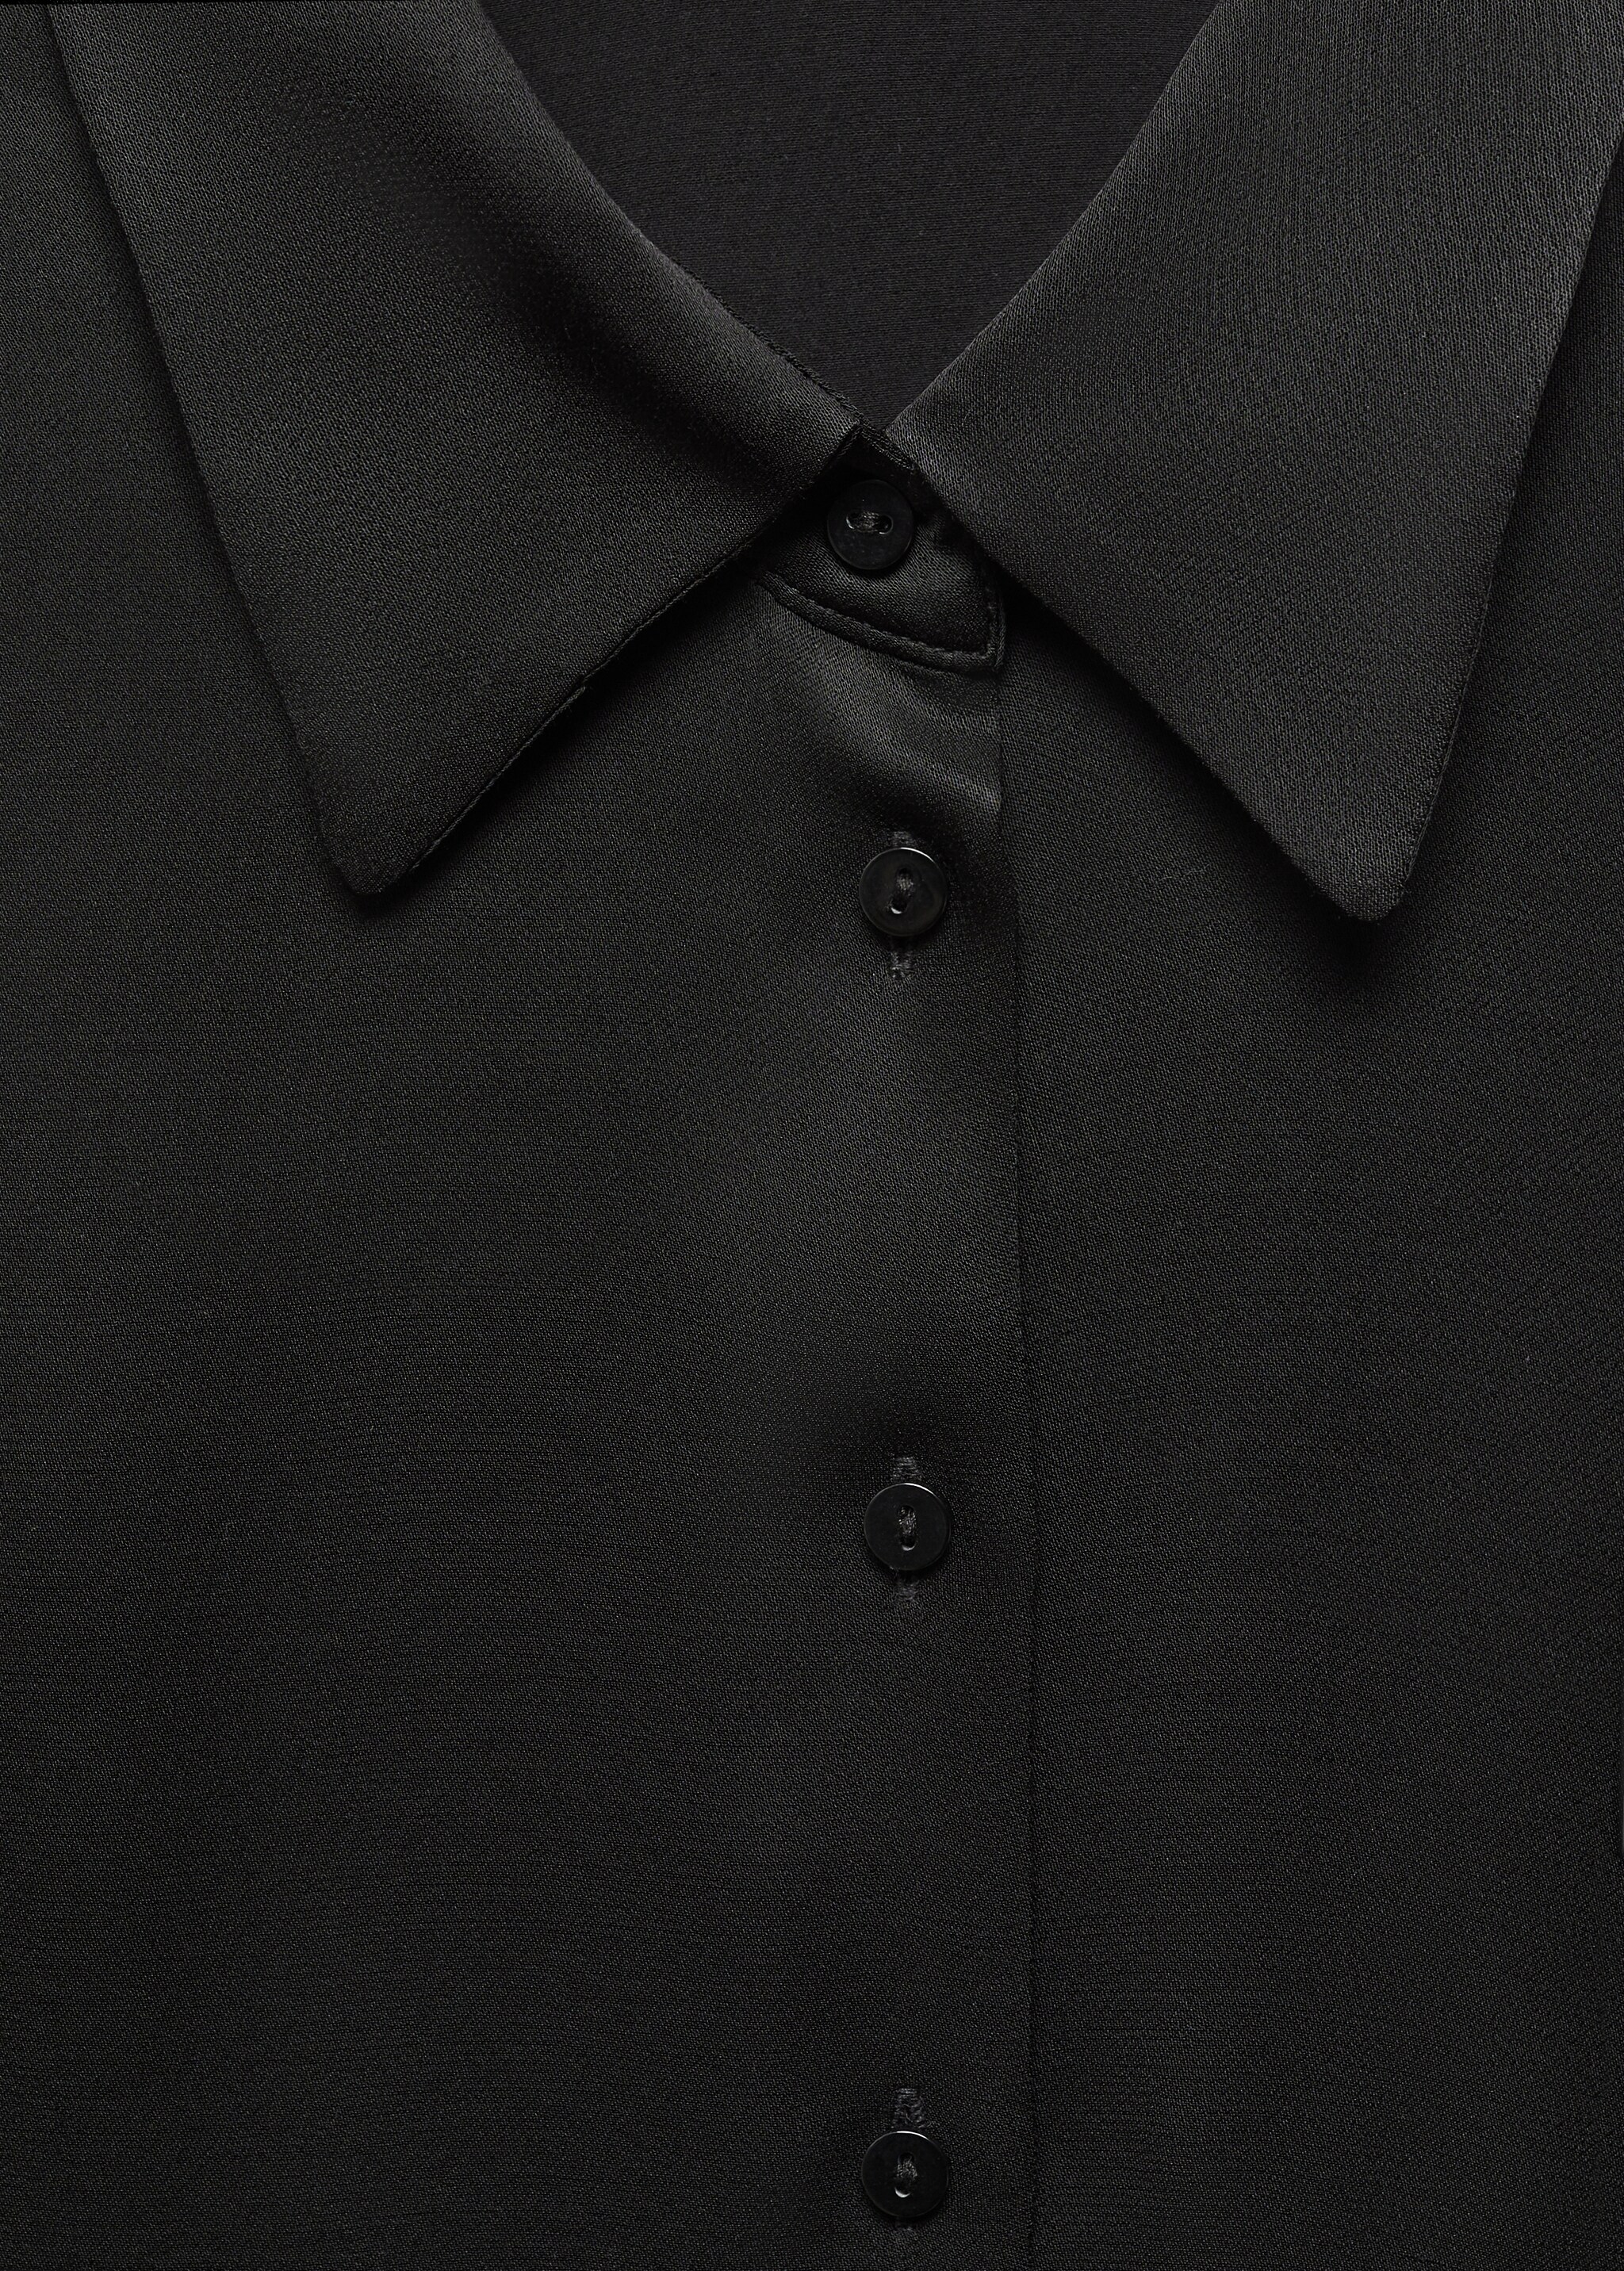 Satin finish flowy shirt - Details of the article 8